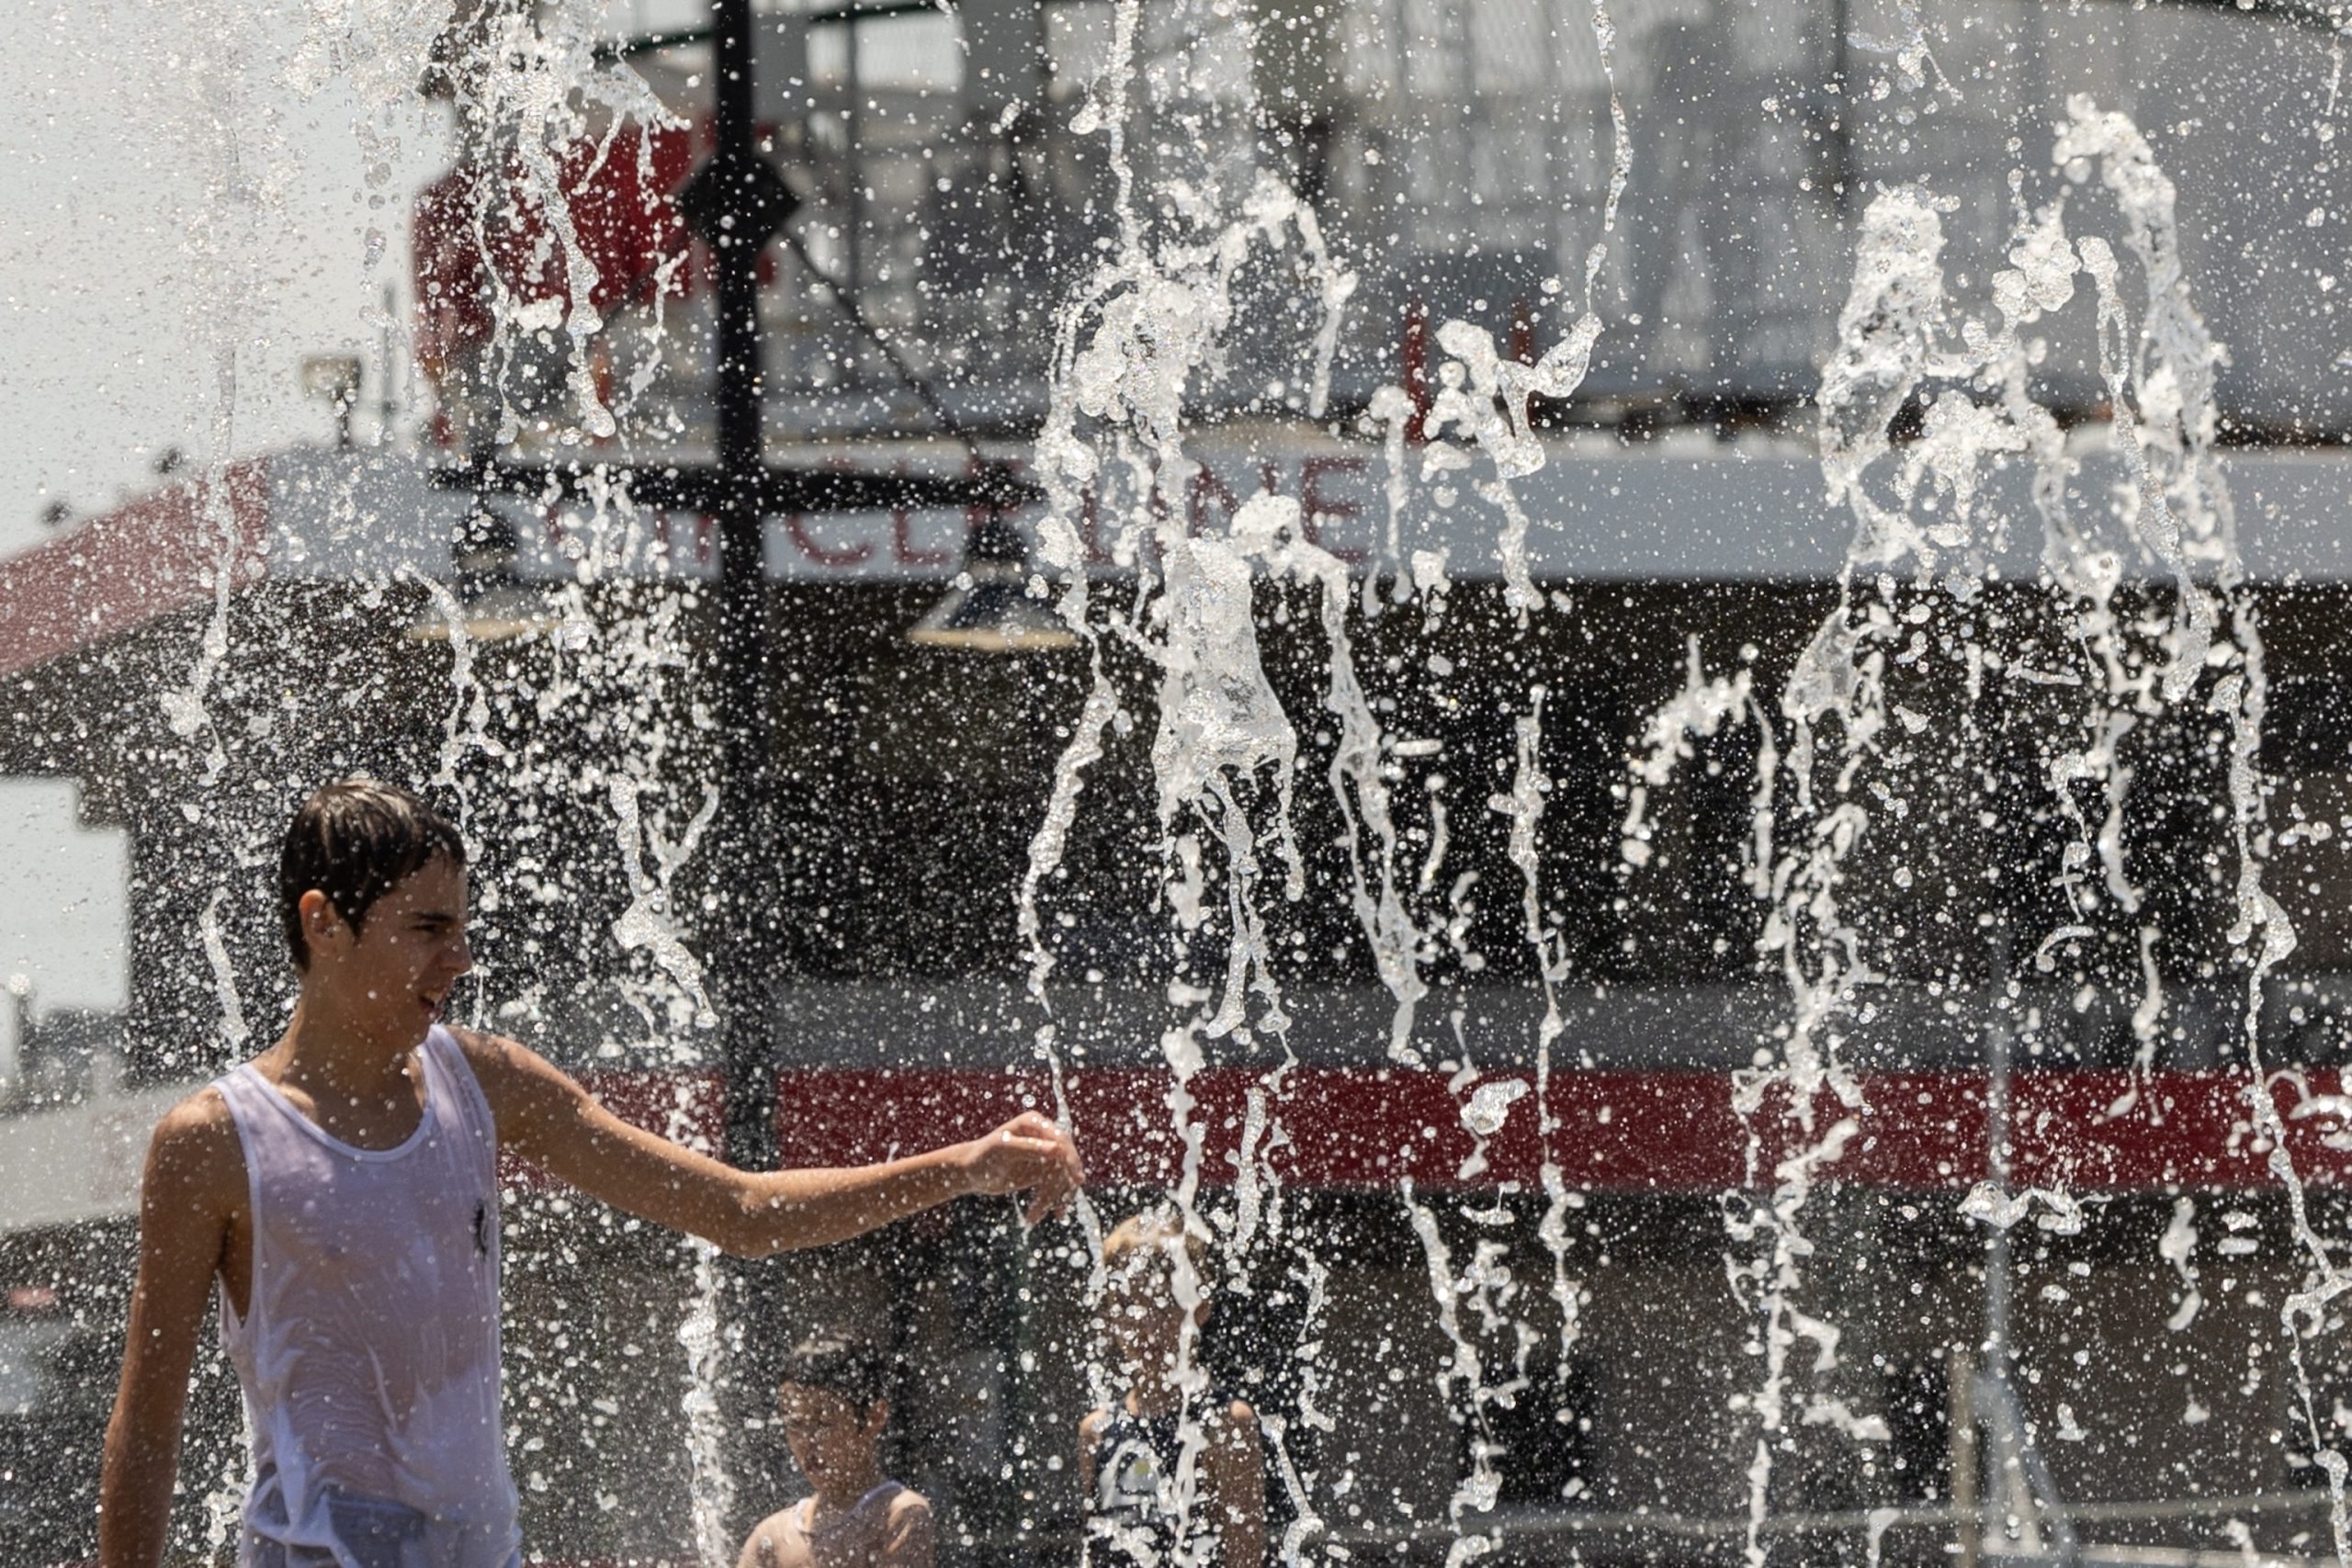 Dangerous temperatures persist as heat dome blankets cities across the country for second week